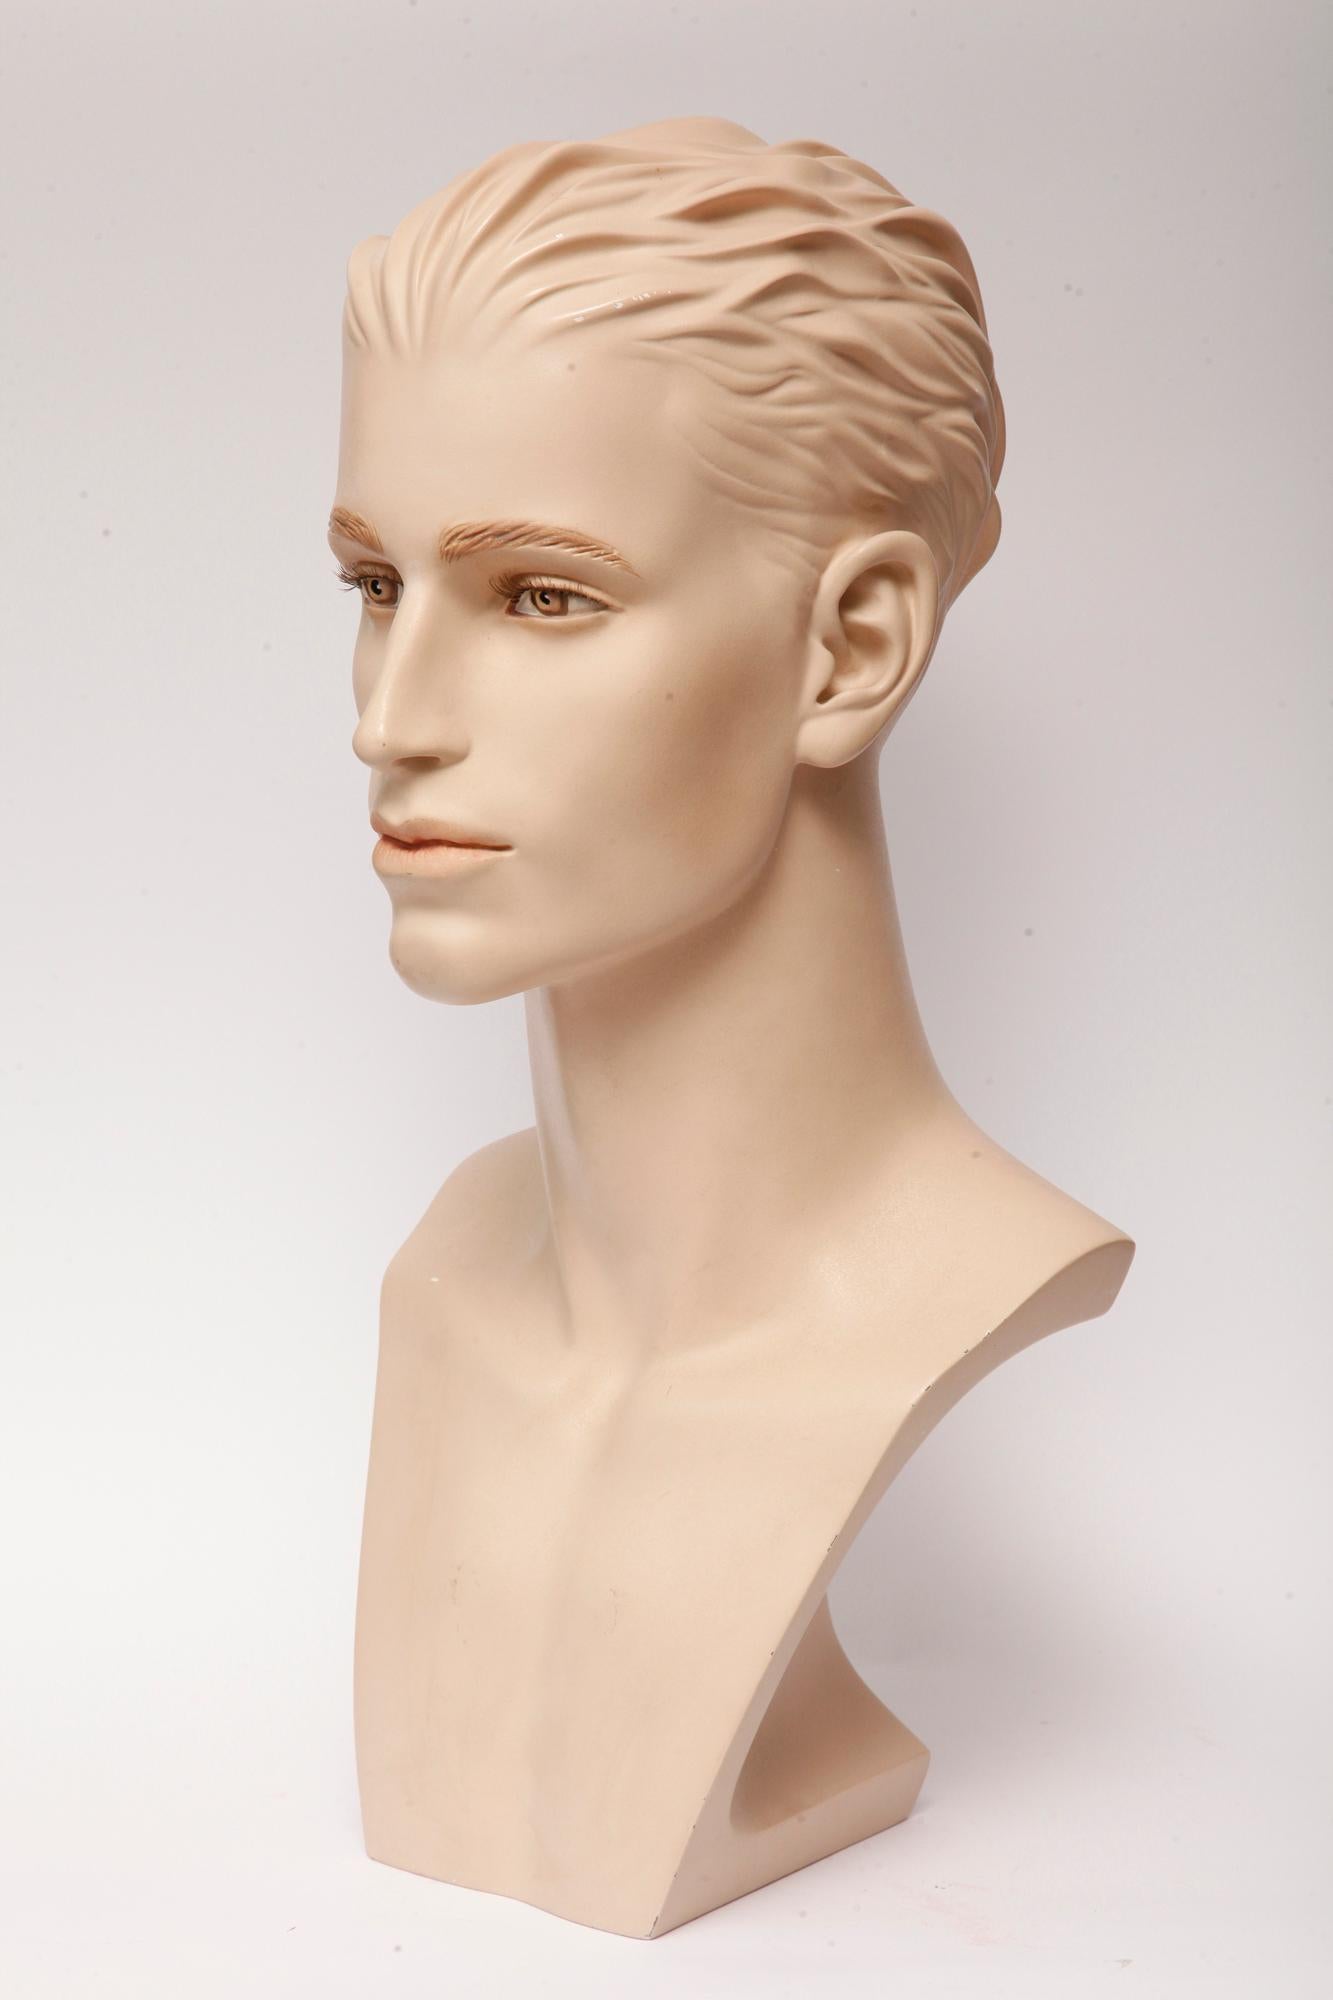 Men's realistic, advertising mannequin, bust used to display necklaces. Extremely realistic, meticulously finished in black ink, with realistic eyes, eyebrows and eyelashes. In excellent condition for its age, with the one minor gypsum defects in